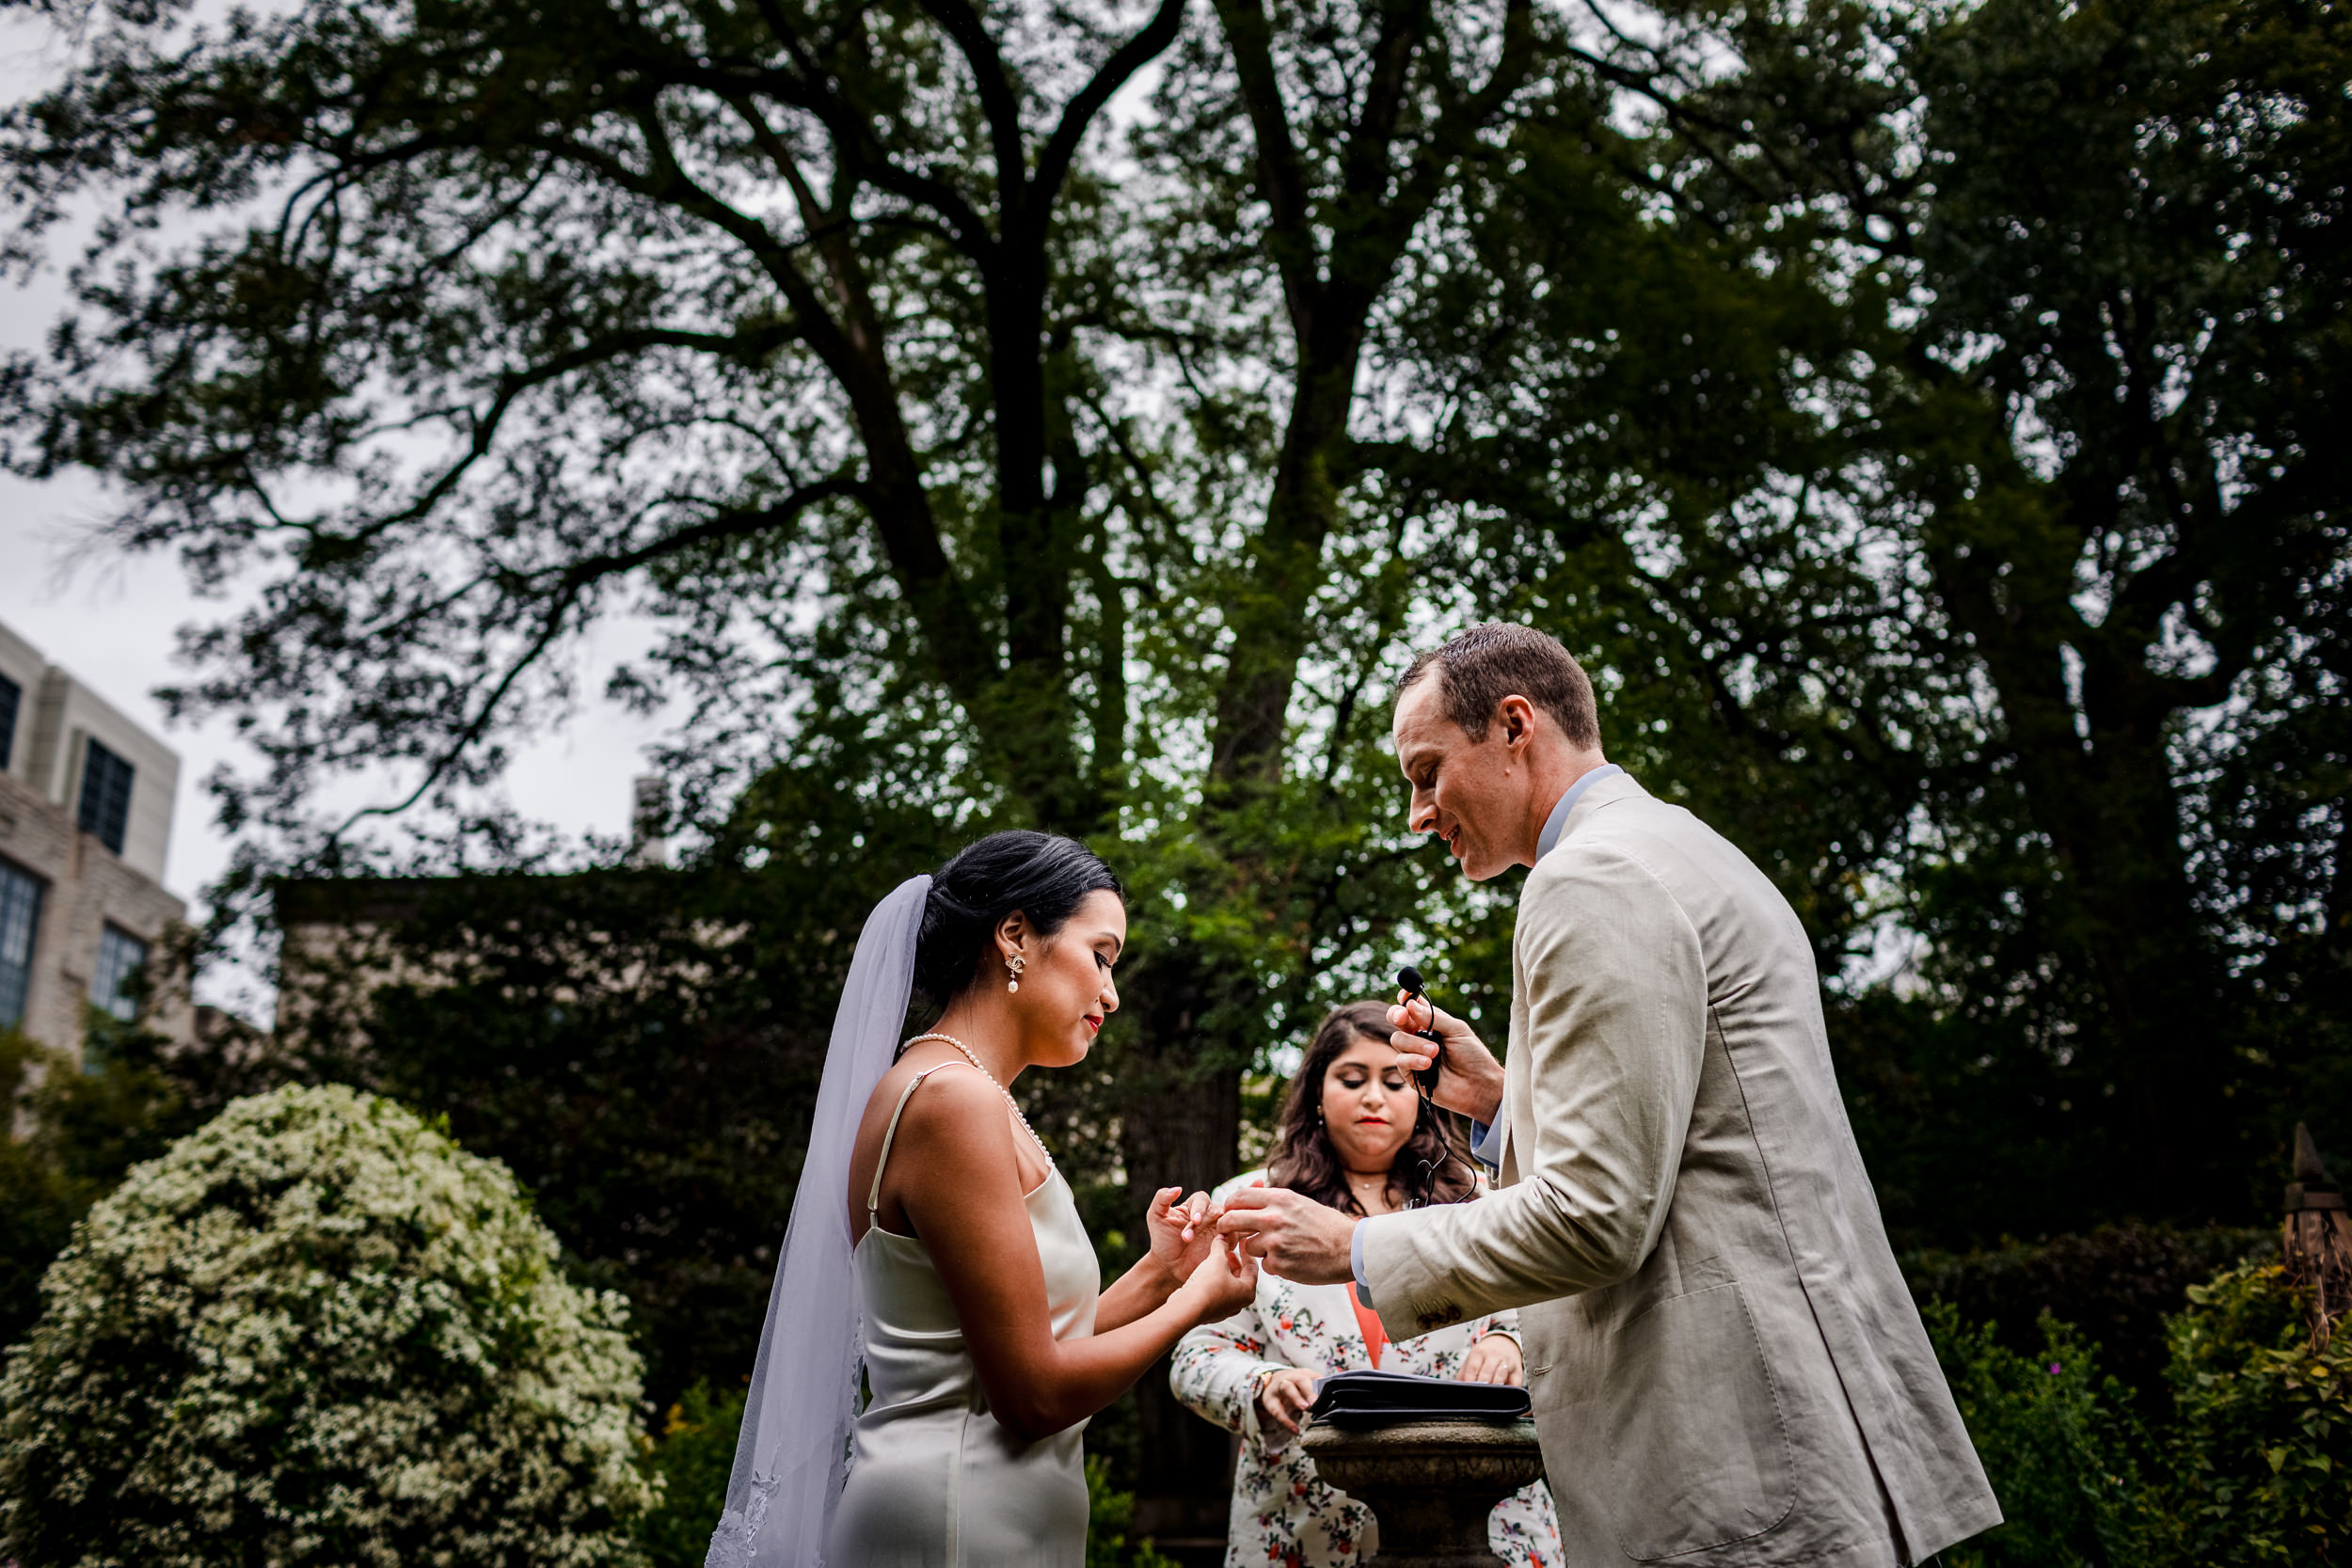 A couple exchanges rings during a Shakespeare Garden micro wedding in Evanston.